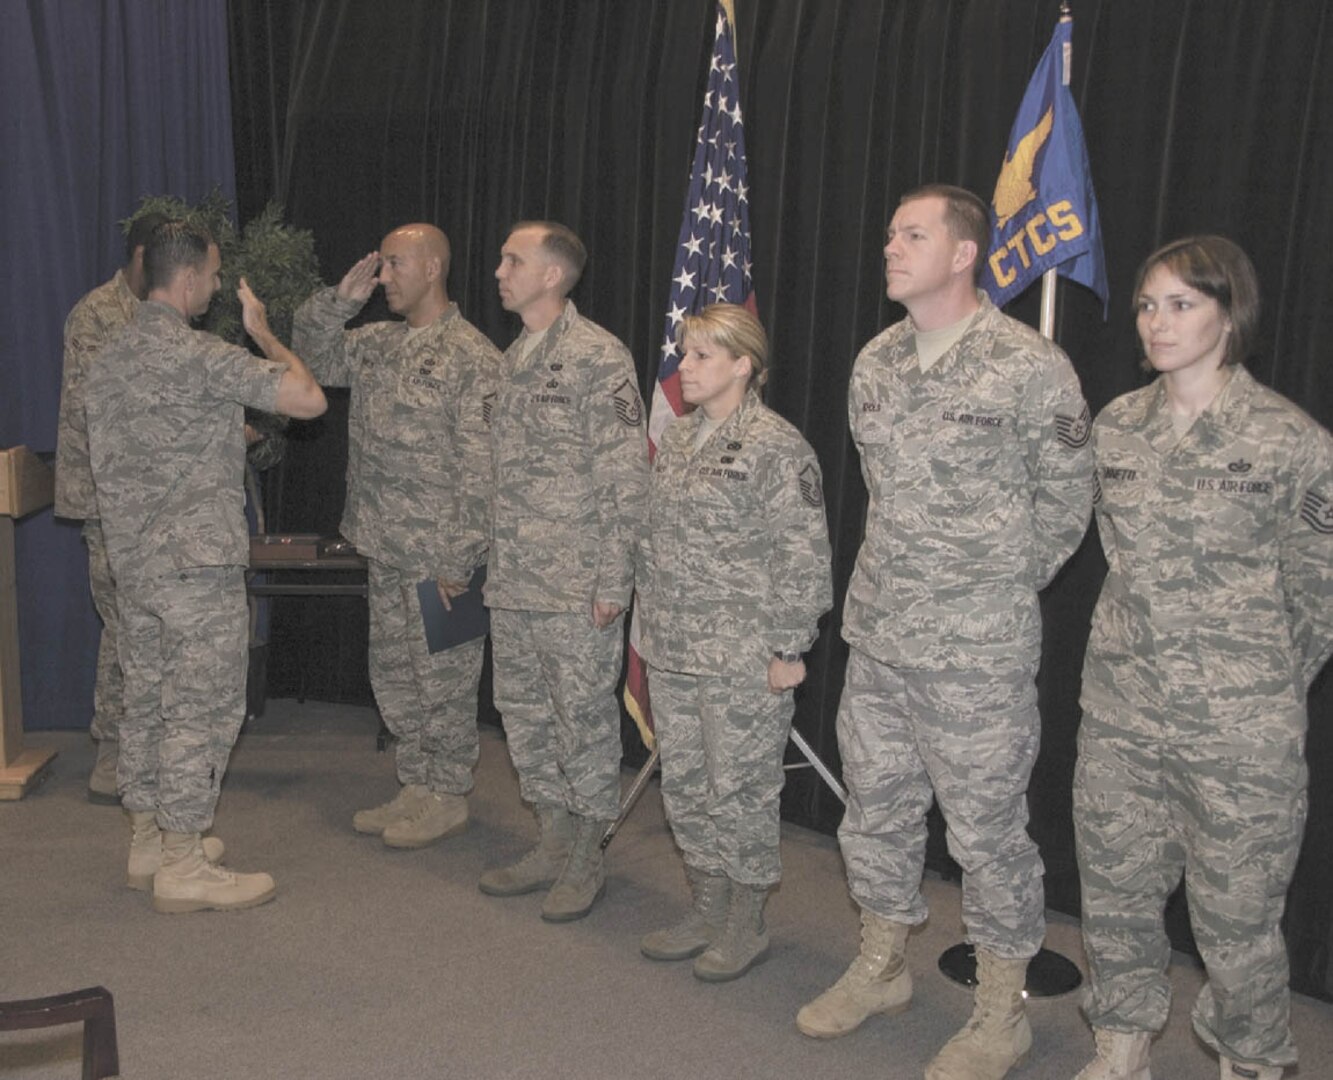 Maj. Thomas Knowles, (left) 3rd Combat Camera Squadron commander, presents training certificates and combat camera patches at the squadron’s inaugural combat correspondent (video) training course graduation ceremony at Lackland April 30. The course’s first graduates (left to right) are Master Sgt. Robert Shields, Master Sgt. Michael Hamill, Master Sgt. Piper Faulisi, Tech. Sgt. Kevin Nichols and Tech. Sgt. Rebecca Zannetti. (U.S. Air Force photo by Steve Ninotta)